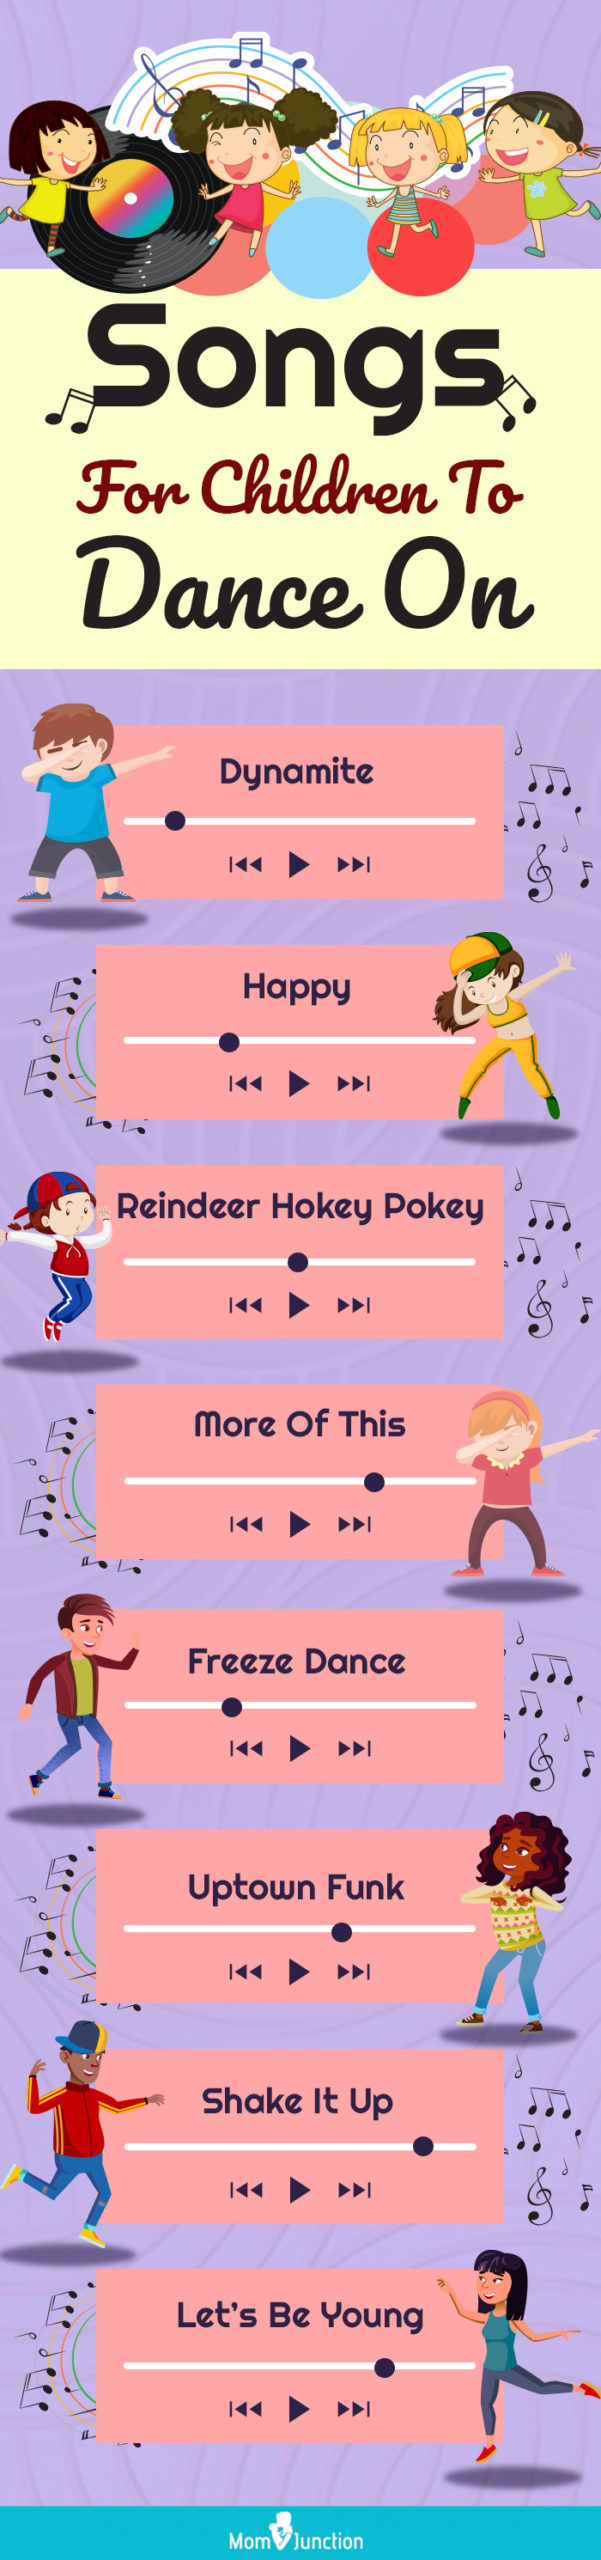 Freeze Dance Songs - Sing and Dance Along with THE KIBOOMERS - 15 Minutes 